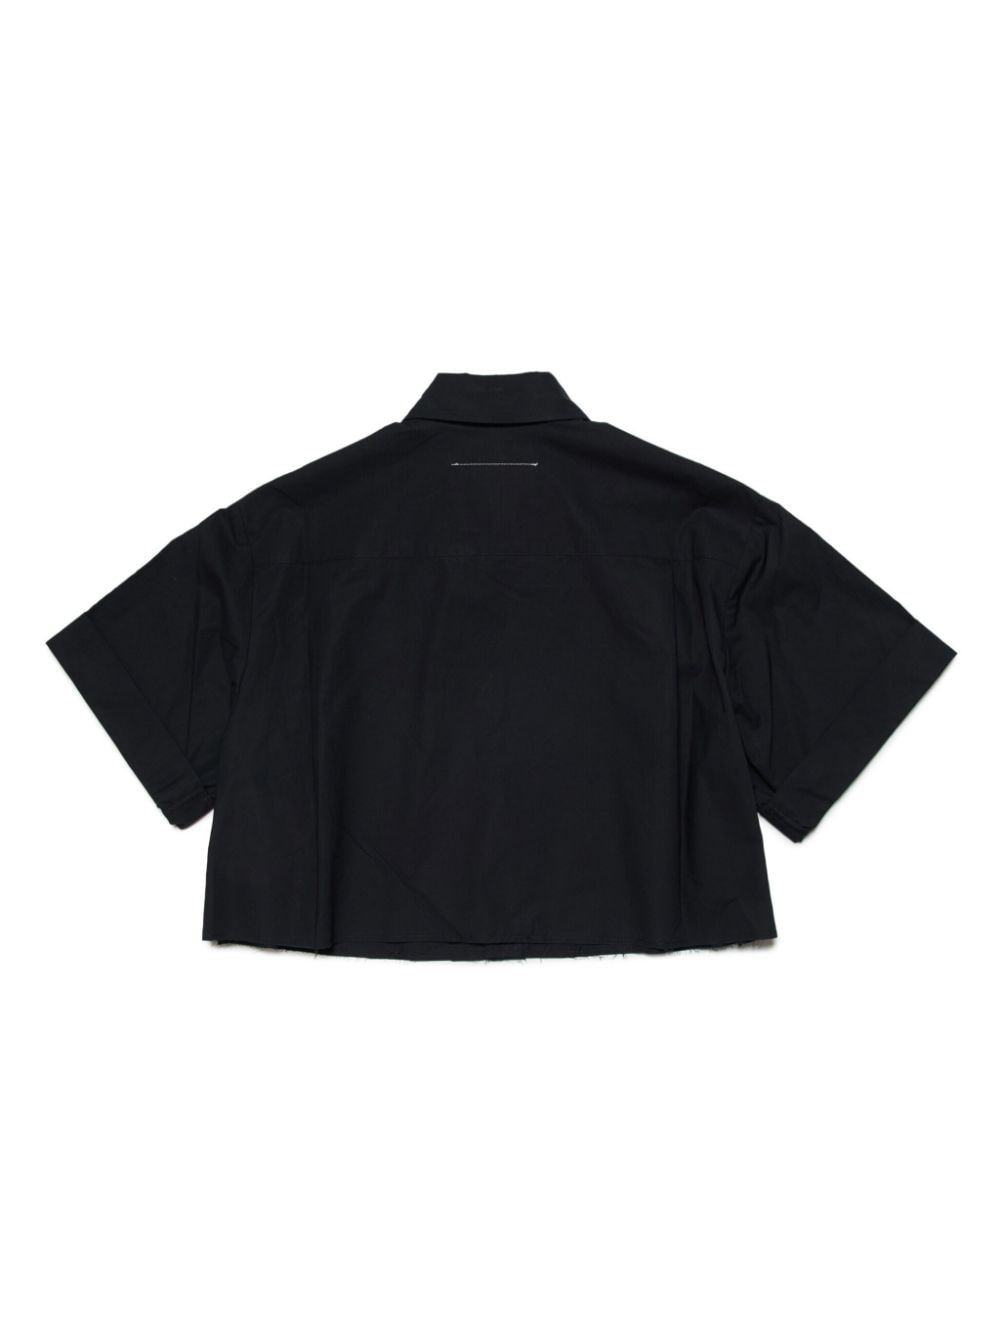 Black shirt for girls with logo